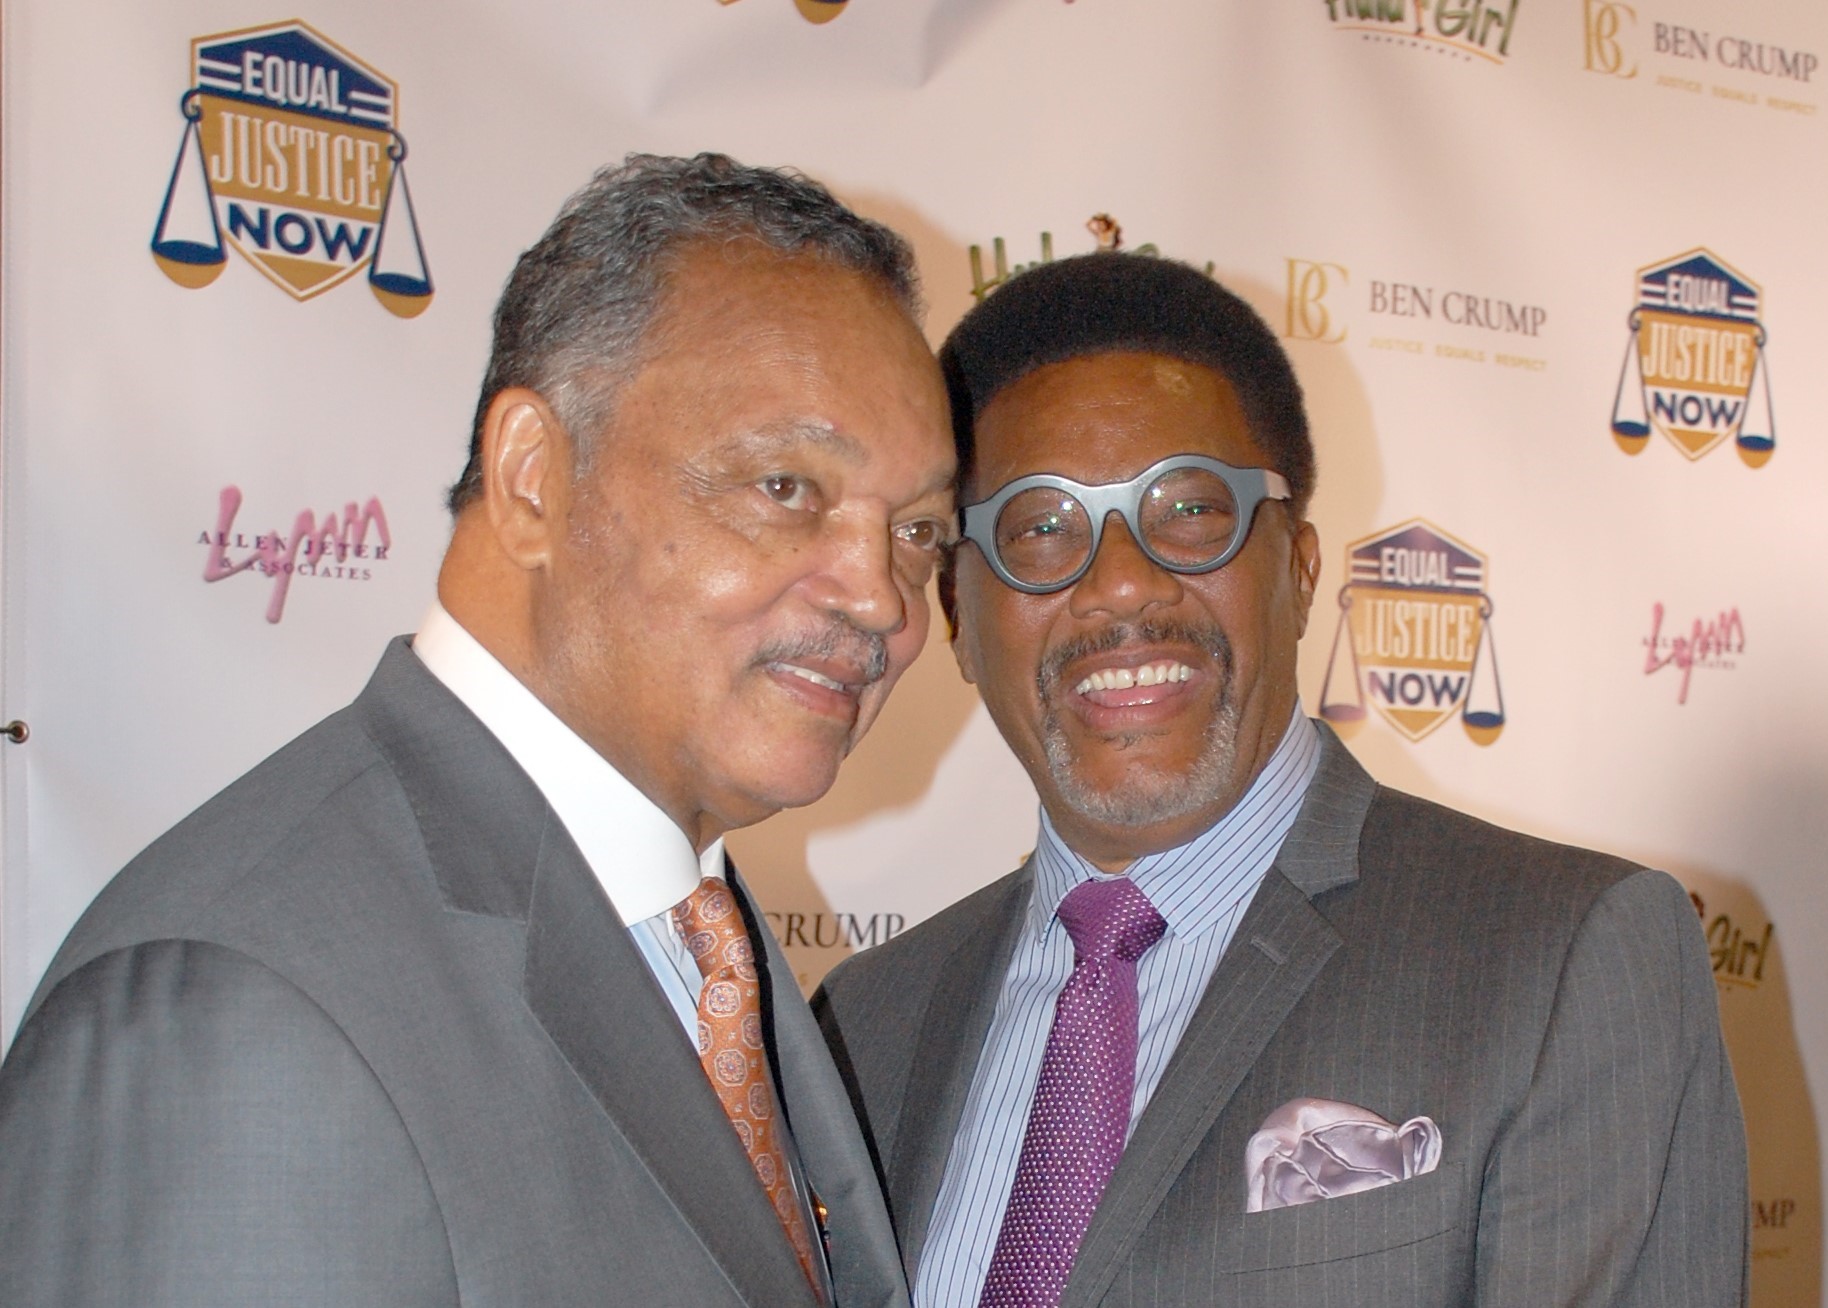 Equal Justice Now Honors Judge Greg Mathis and other Equal Justice Advocates in Hollywood